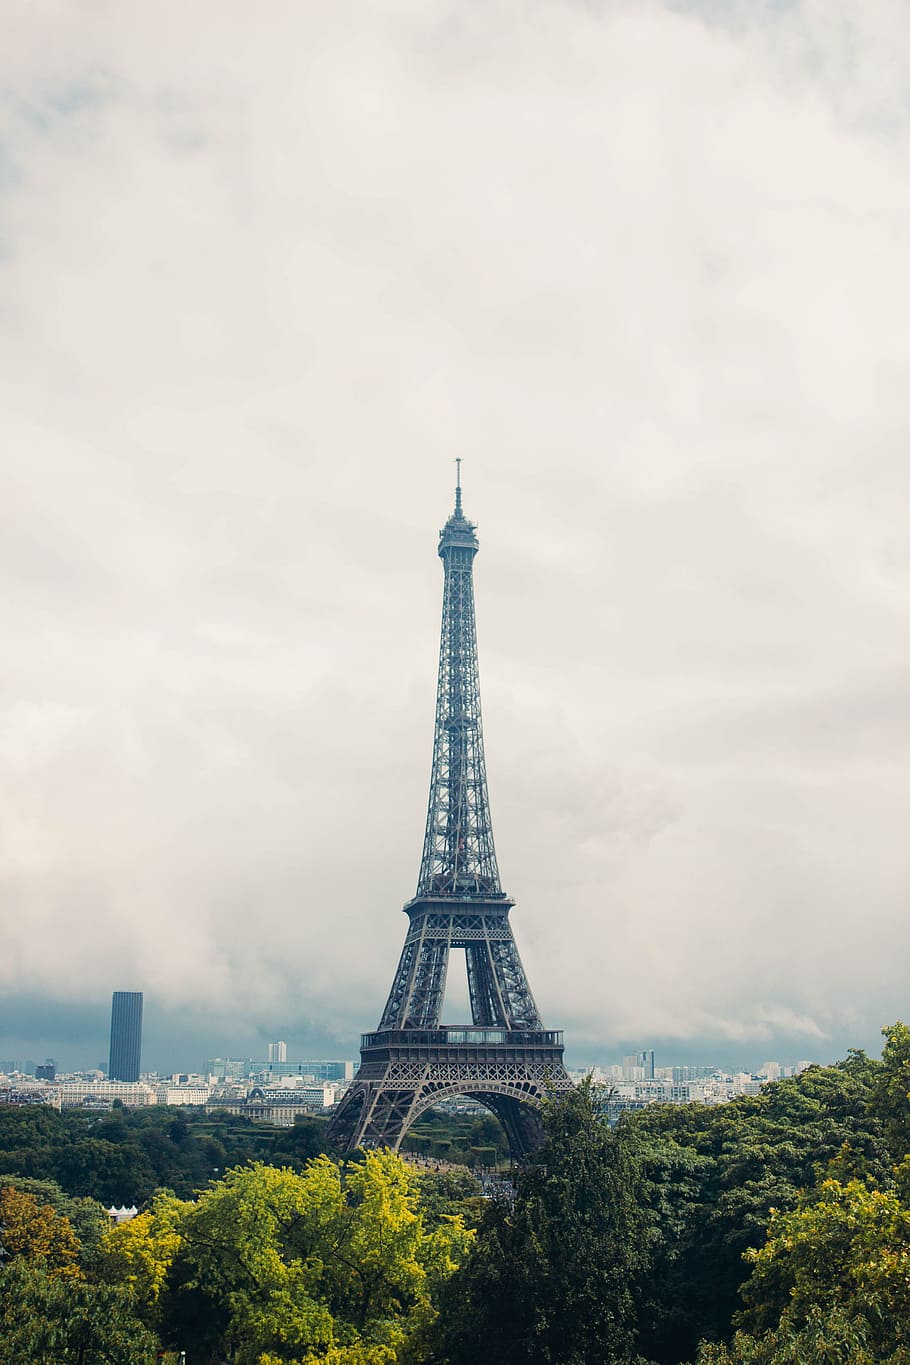 Eiffel tower surrounded by trees on a cloudy day, arc, architectural